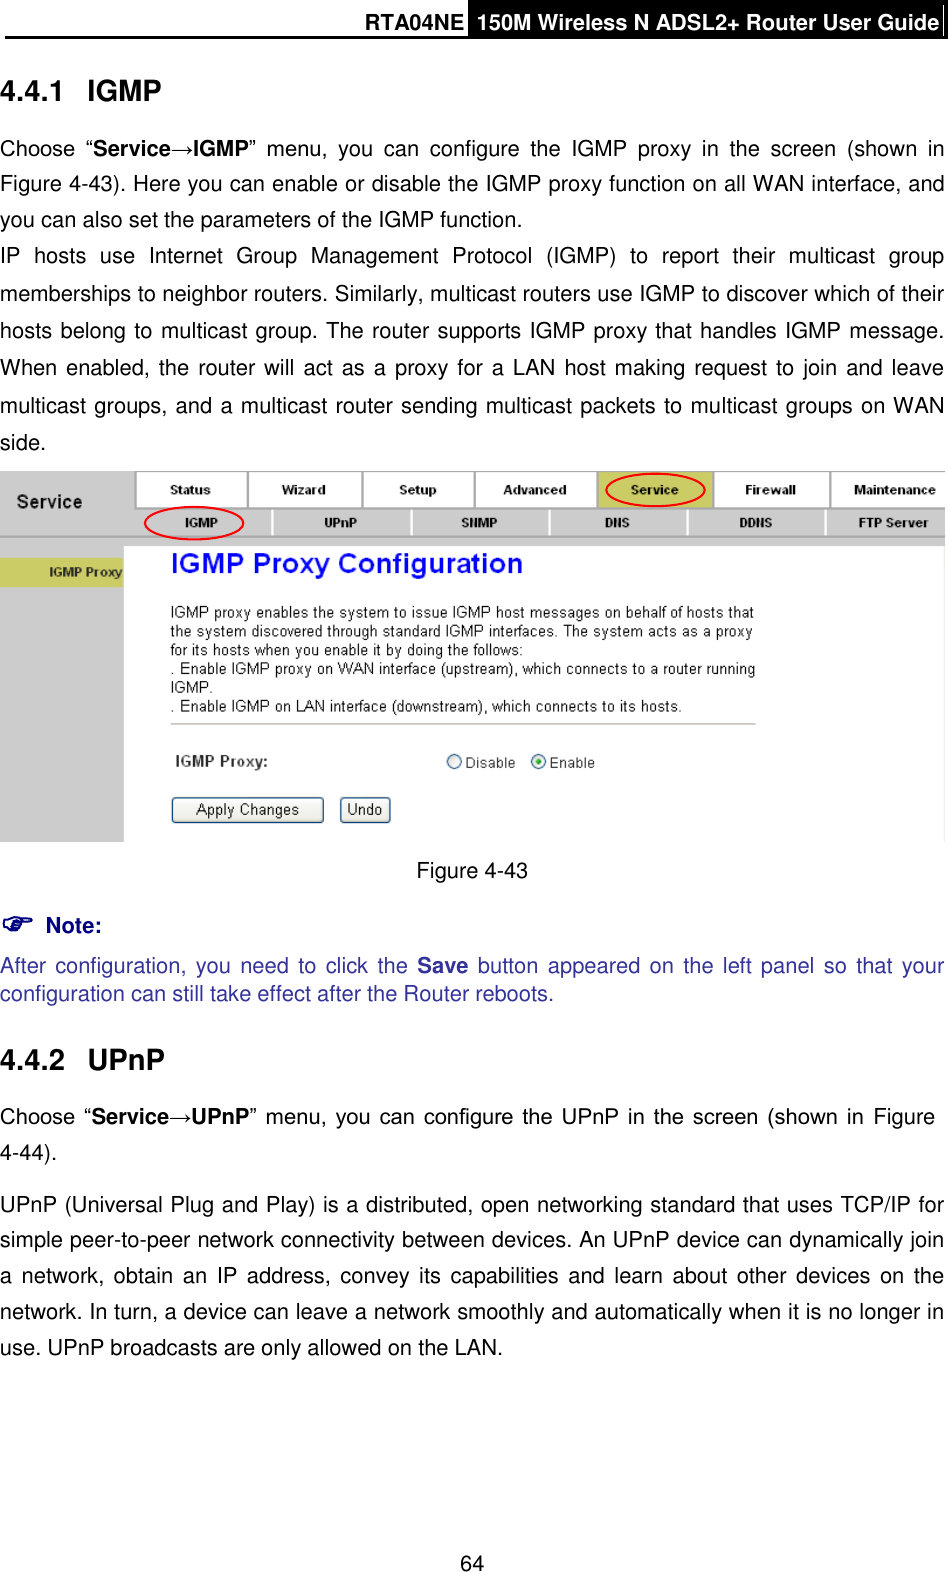 RTA04NE 150M Wireless N ADSL2+ Router User Guide  64 4.4.1  IGMP   Choose  “Service→IGMP”  menu,  you  can  configure  the  IGMP  proxy  in  the  screen  (shown  in Figure 4-43). Here you can enable or disable the IGMP proxy function on all WAN interface, and you can also set the parameters of the IGMP function. IP  hosts  use  Internet  Group  Management  Protocol  (IGMP)  to  report  their  multicast  group memberships to neighbor routers. Similarly, multicast routers use IGMP to discover which of their hosts belong to multicast group. The router supports IGMP proxy that handles IGMP message. When enabled, the router will act as a proxy for a LAN host making request to join and leave multicast groups, and a multicast router sending multicast packets to multicast groups on WAN side.  Figure 4-43  Note: After configuration, you need to click the Save button appeared on  the left panel so  that your configuration can still take effect after the Router reboots. 4.4.2  UPnP Choose “Service→UPnP” menu,  you can  configure the UPnP  in the screen (shown  in  Figure 4-44). UPnP (Universal Plug and Play) is a distributed, open networking standard that uses TCP/IP for simple peer-to-peer network connectivity between devices. An UPnP device can dynamically join a network,  obtain an  IP  address, convey its  capabilities and  learn  about other devices  on  the network. In turn, a device can leave a network smoothly and automatically when it is no longer in use. UPnP broadcasts are only allowed on the LAN. 